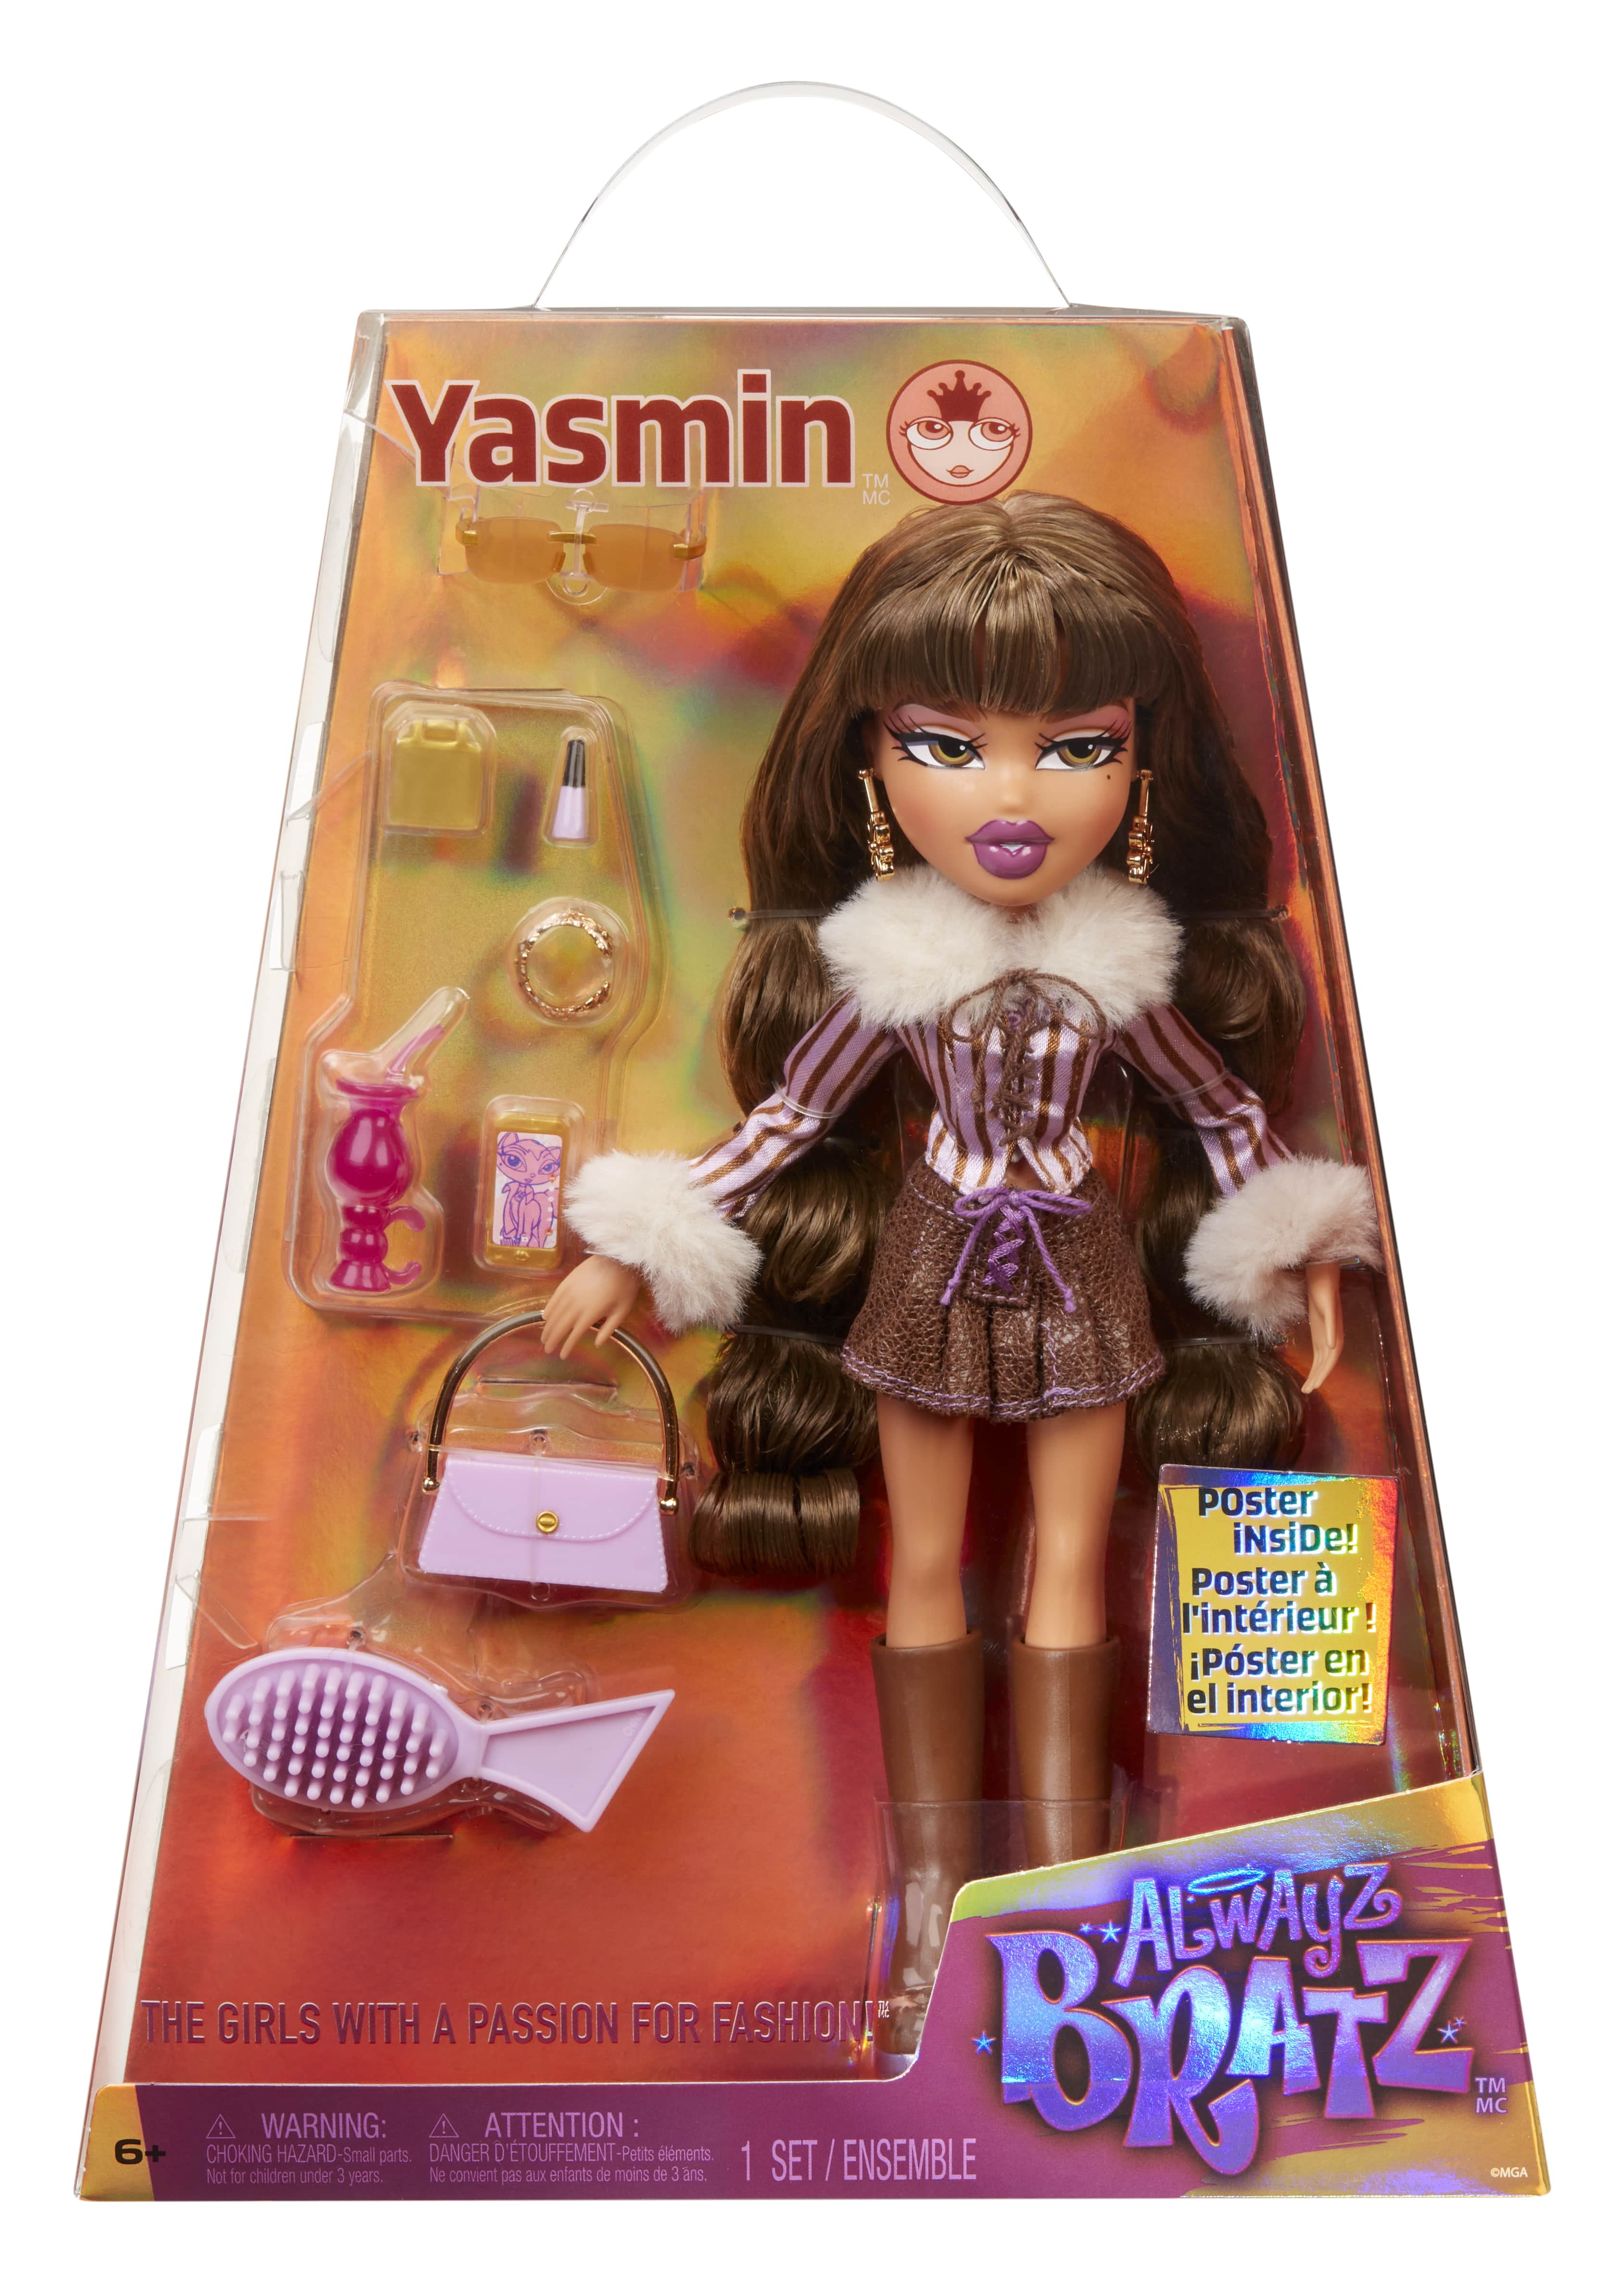 MGA Entertainment Bratz Sweet Heart Series 10 Inch Doll - YASMIN in White  Baby Girlz Top and Red Skirt with Necklace, Purse, Hairbrush and Lip Gloss